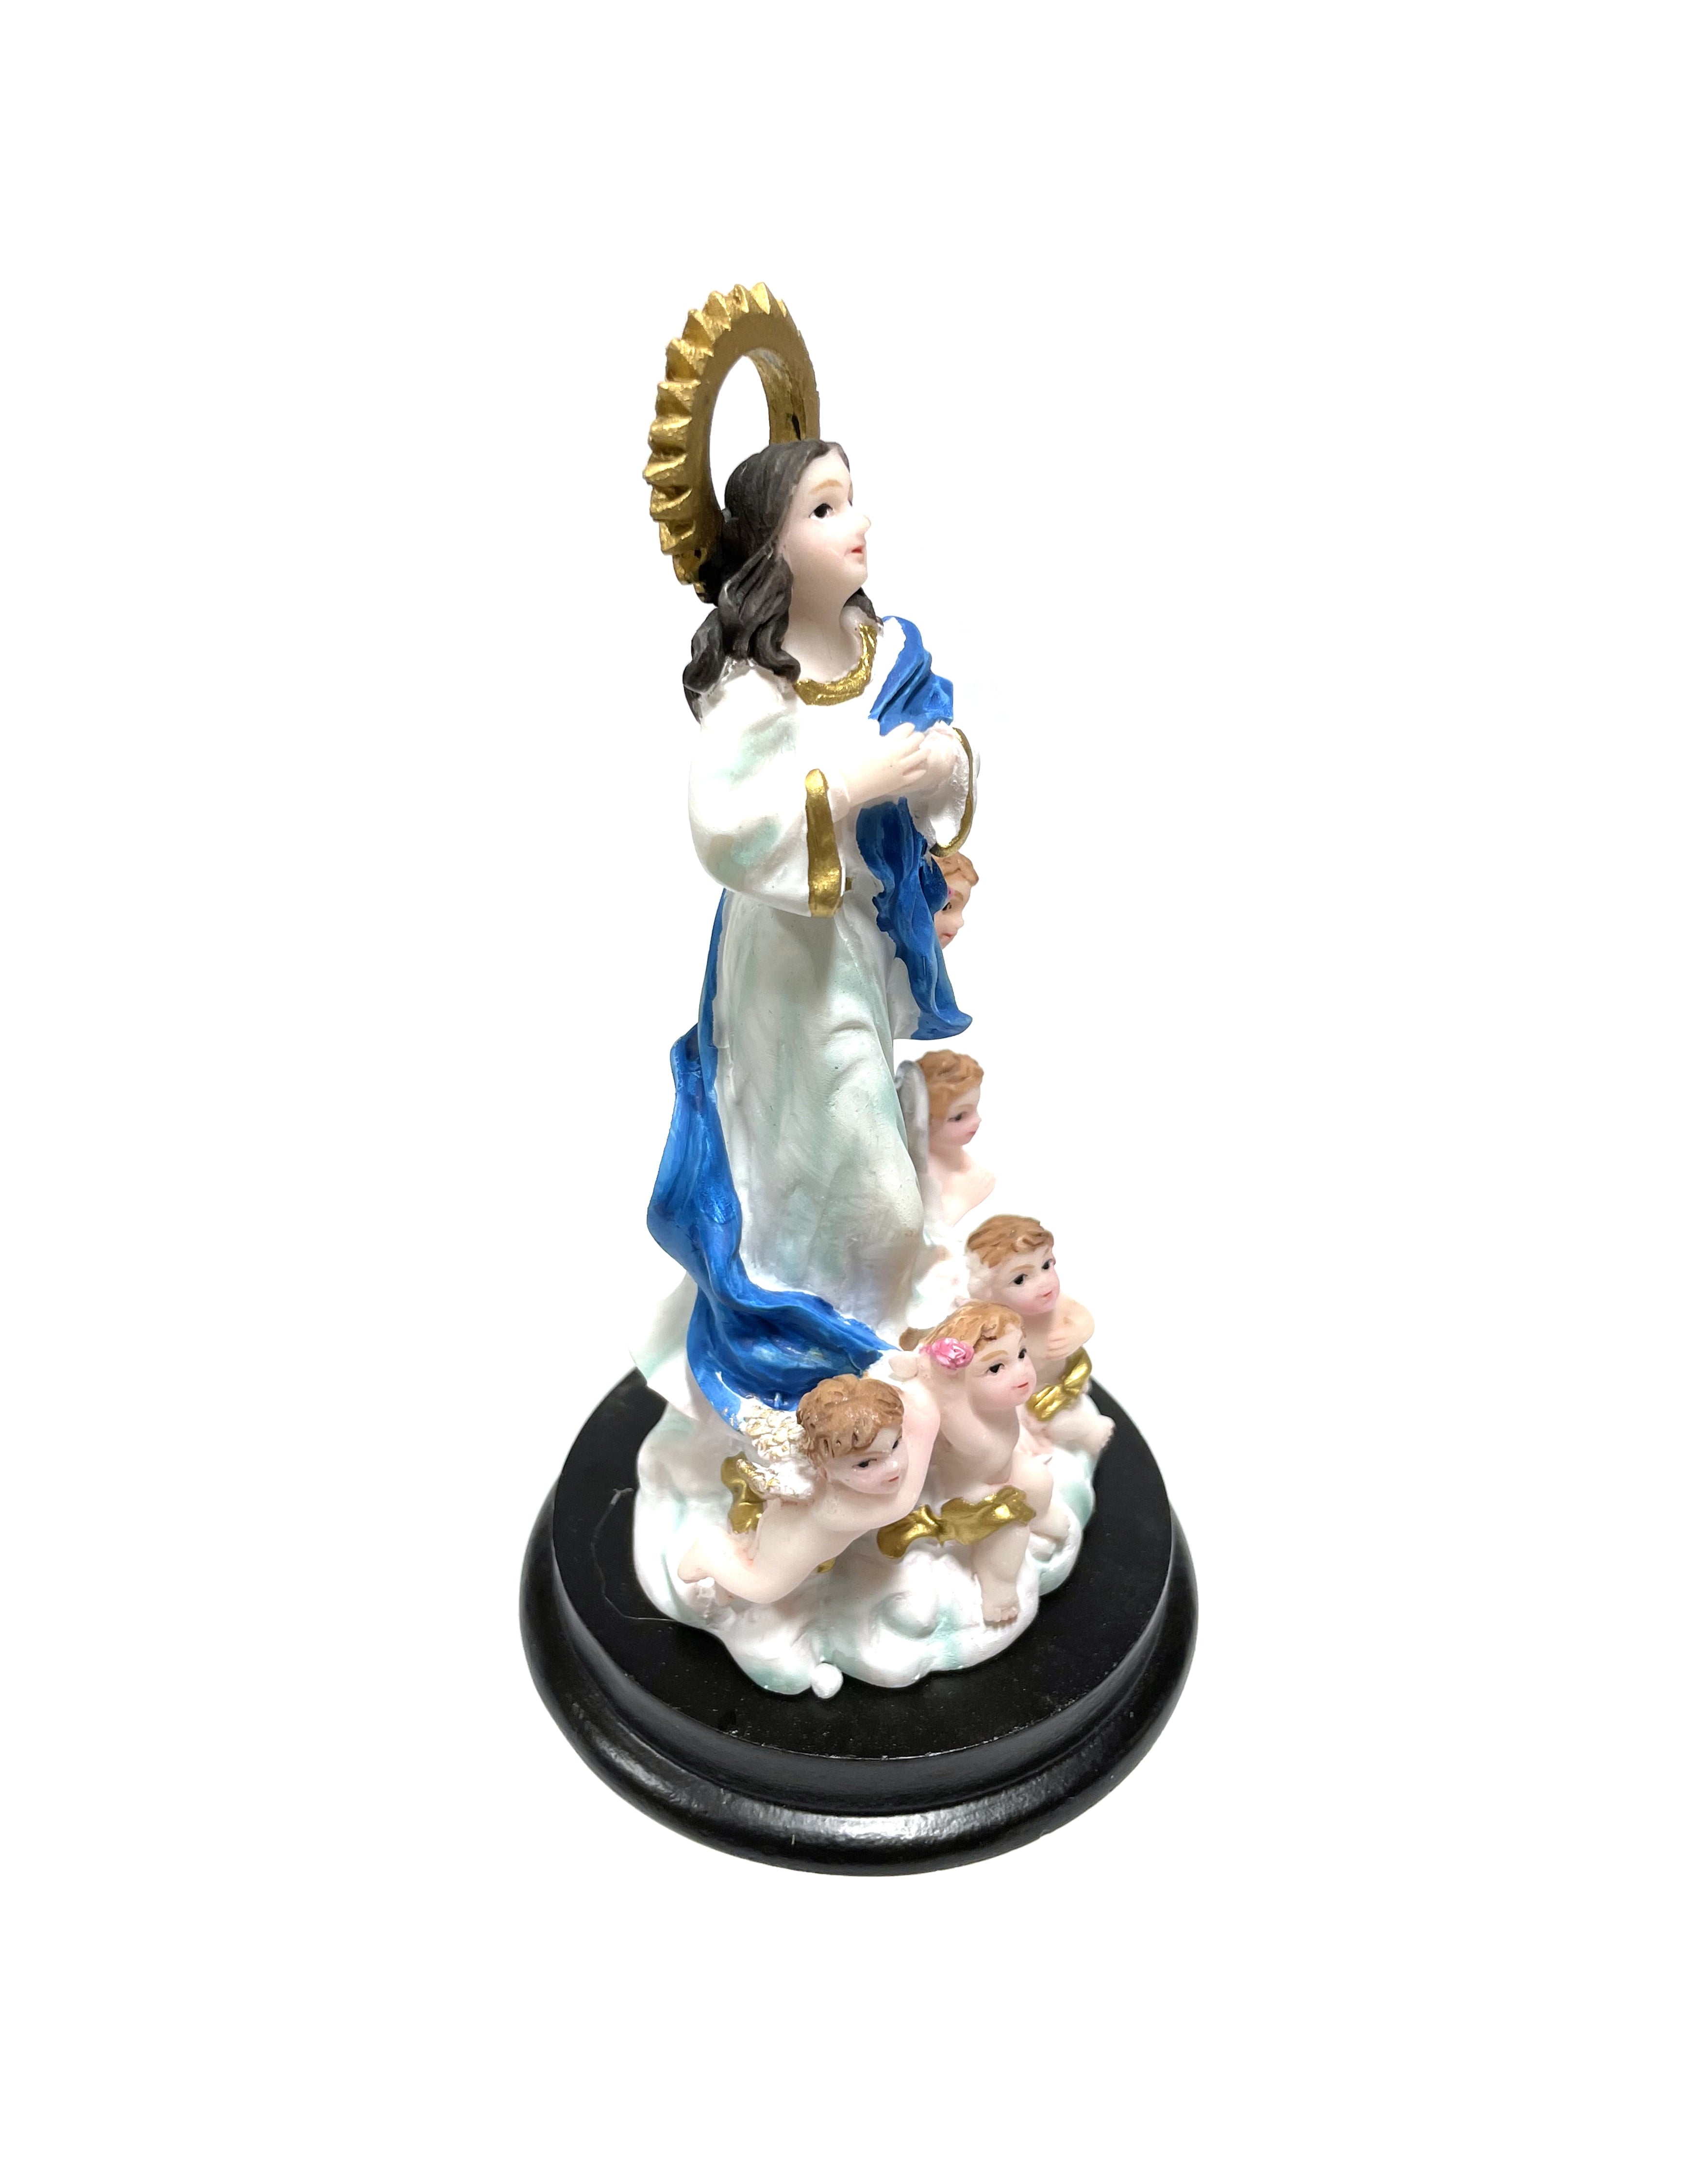 Religious statue of Our Lady of Immaculate Conception of Mary 5" height